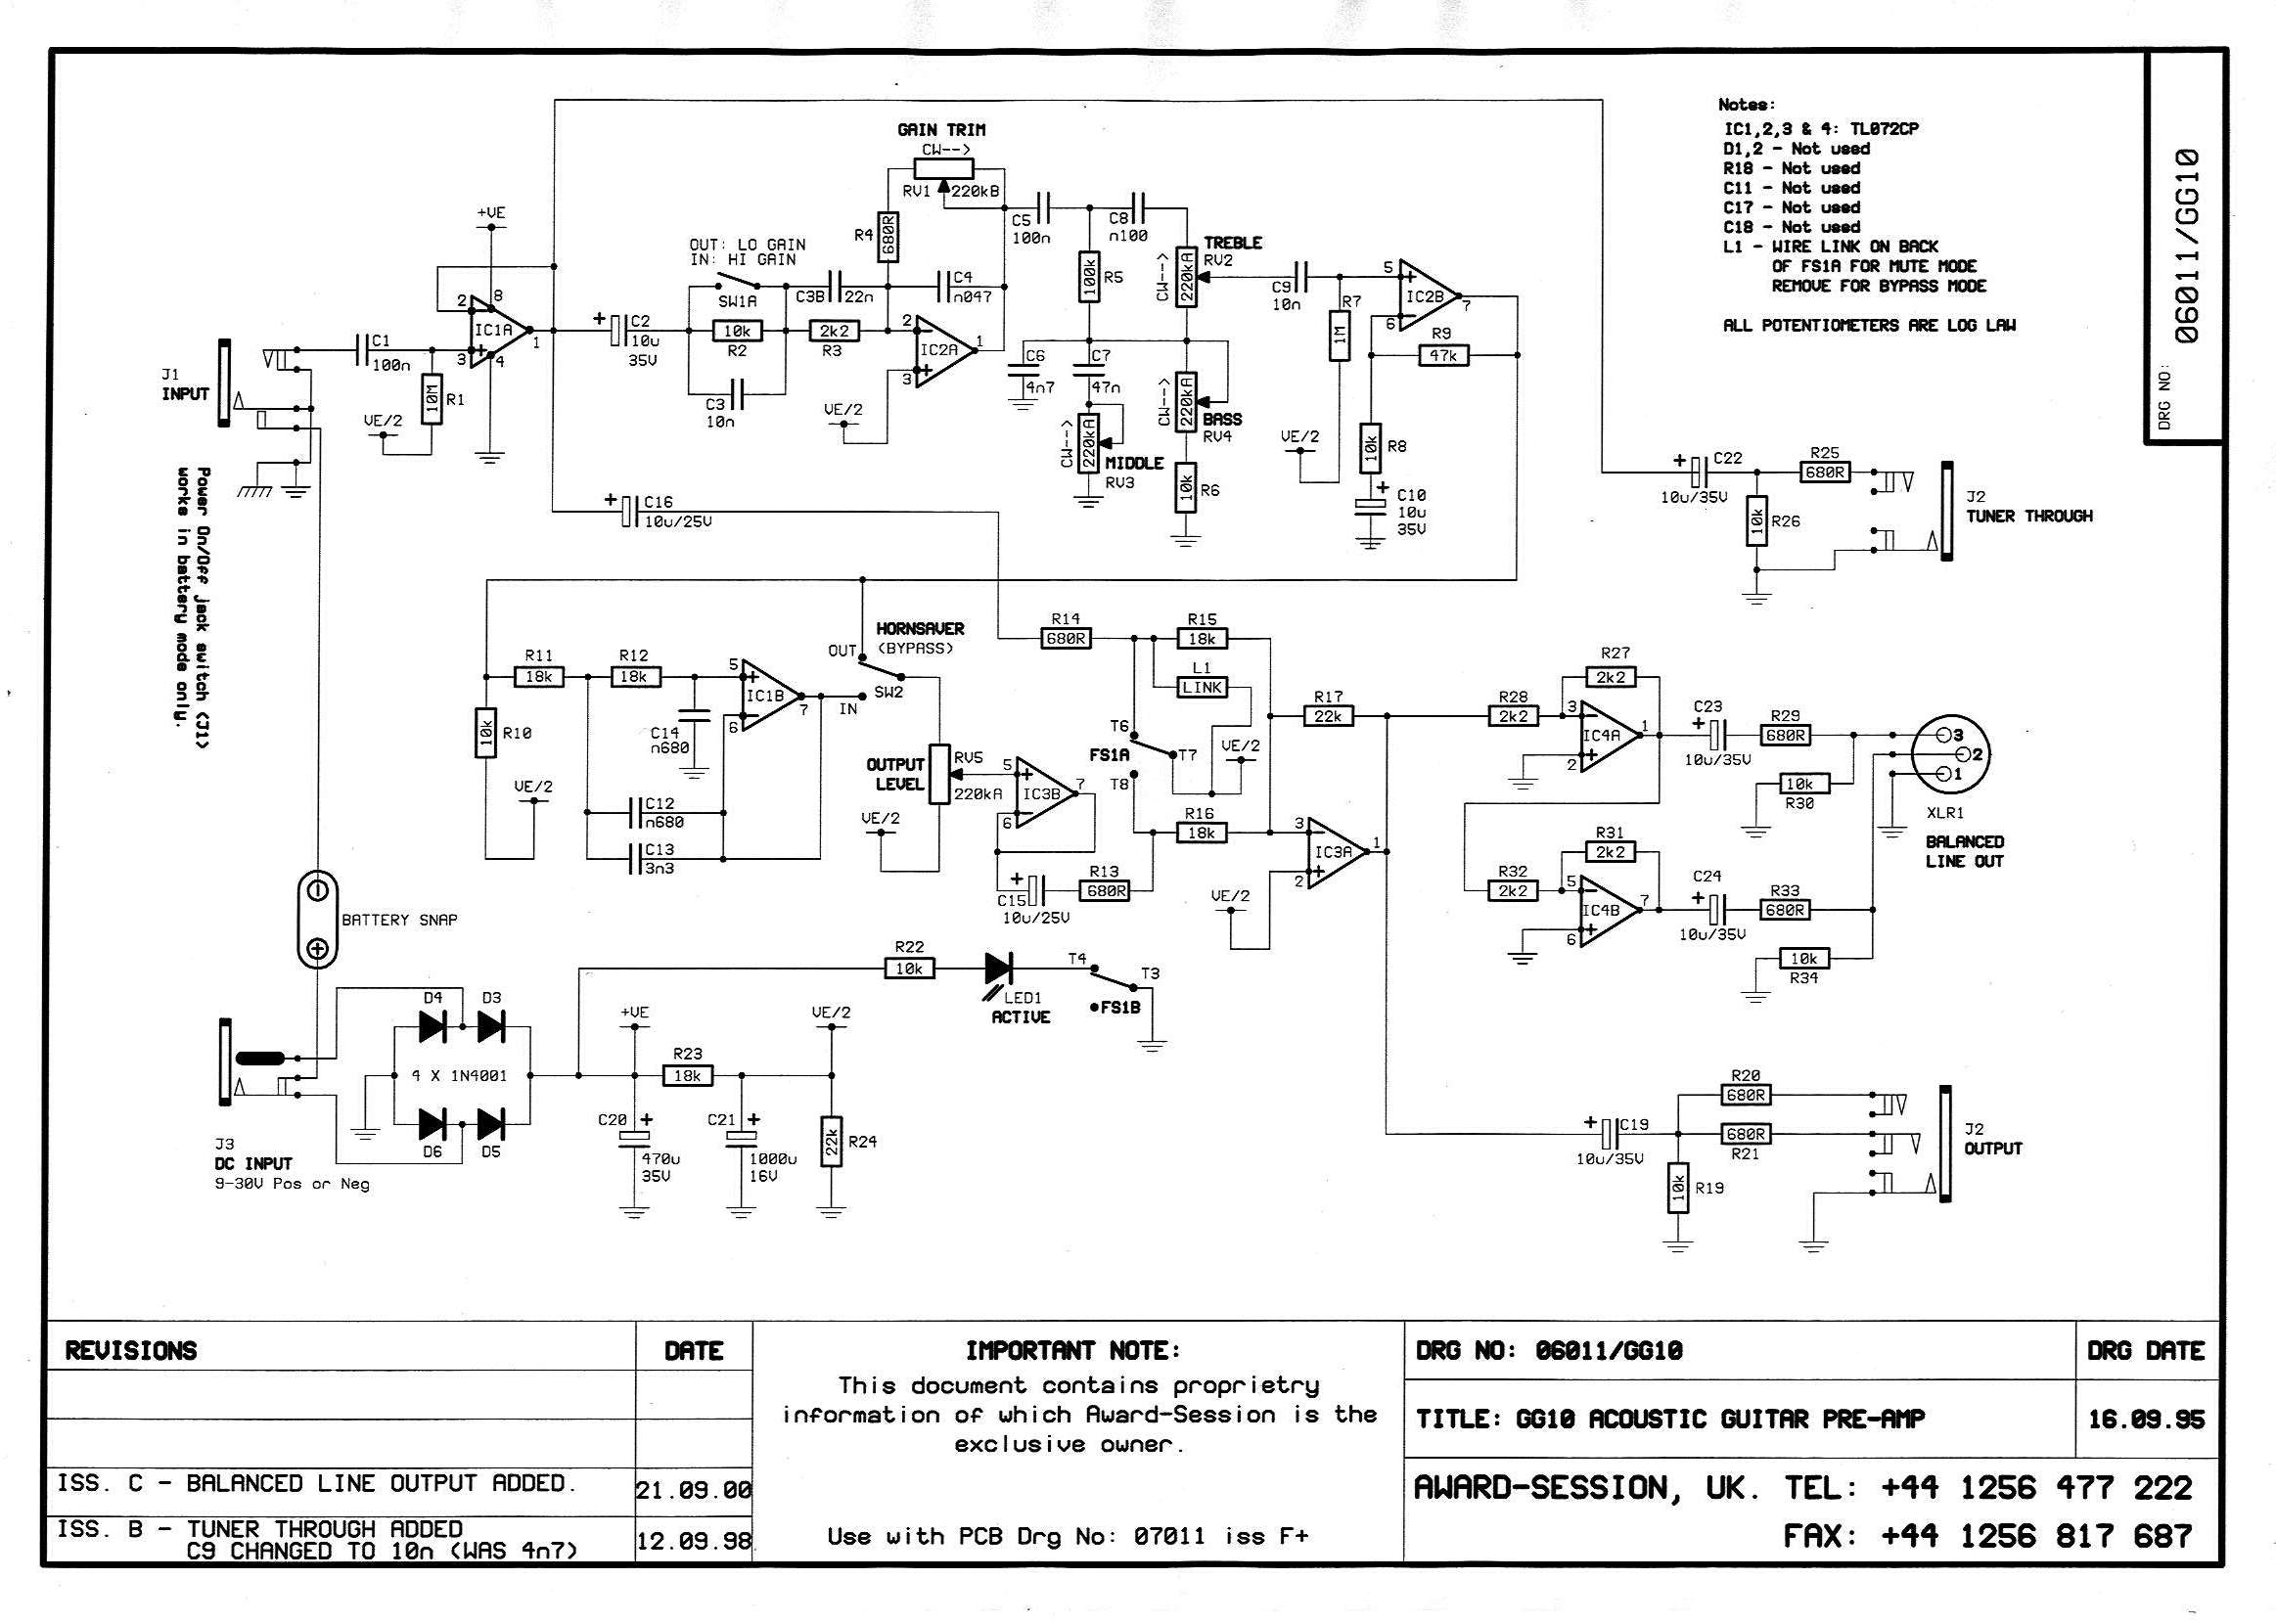 Bass Guitar Preamp Diy - Clublifeglobal.com free download active pickup wiring diagrams 